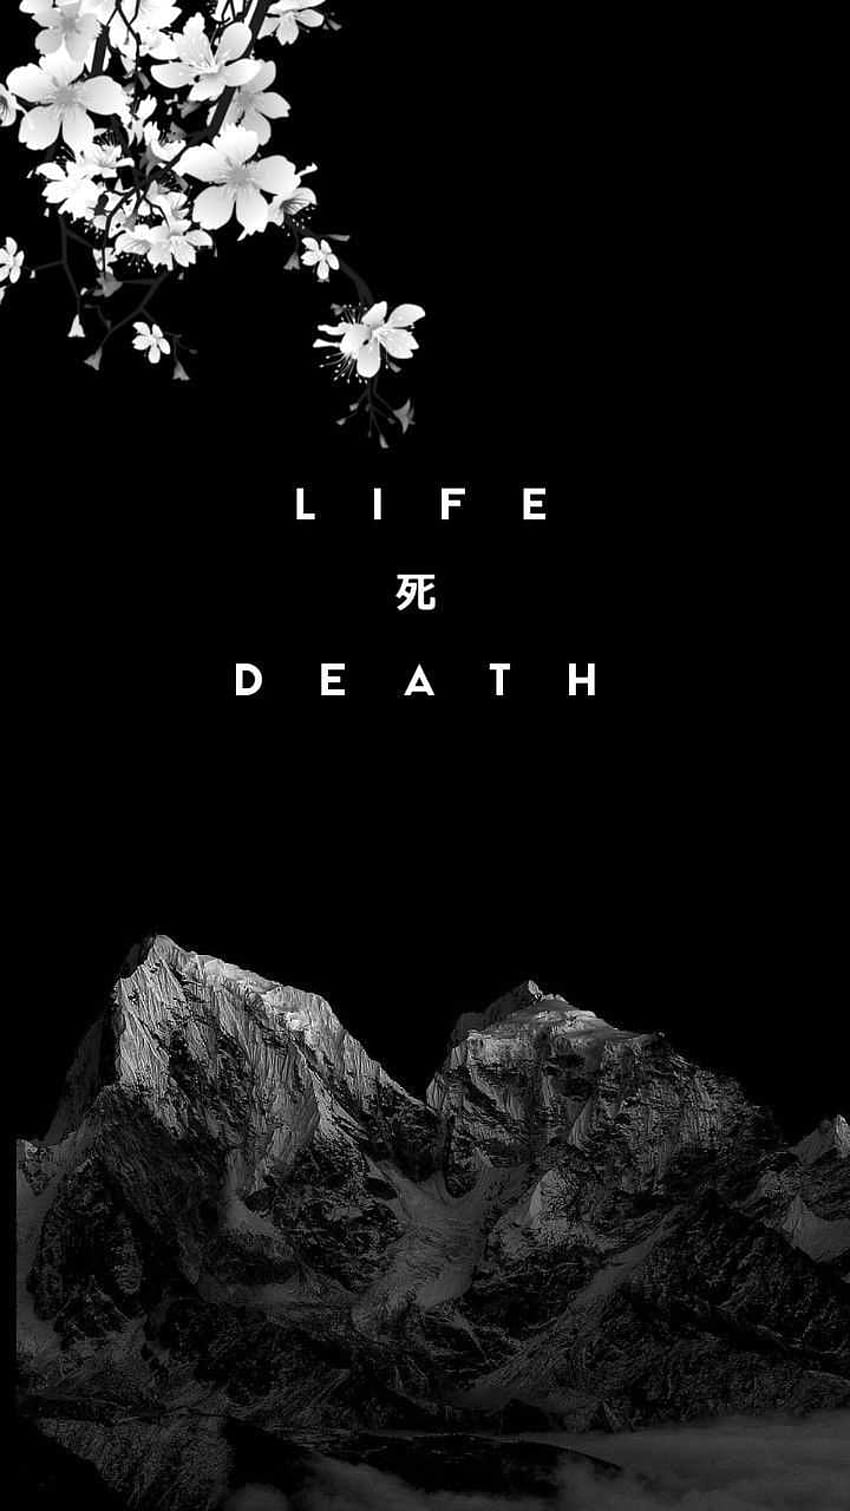 Details 52+ life and death wallpaper latest - in.cdgdbentre